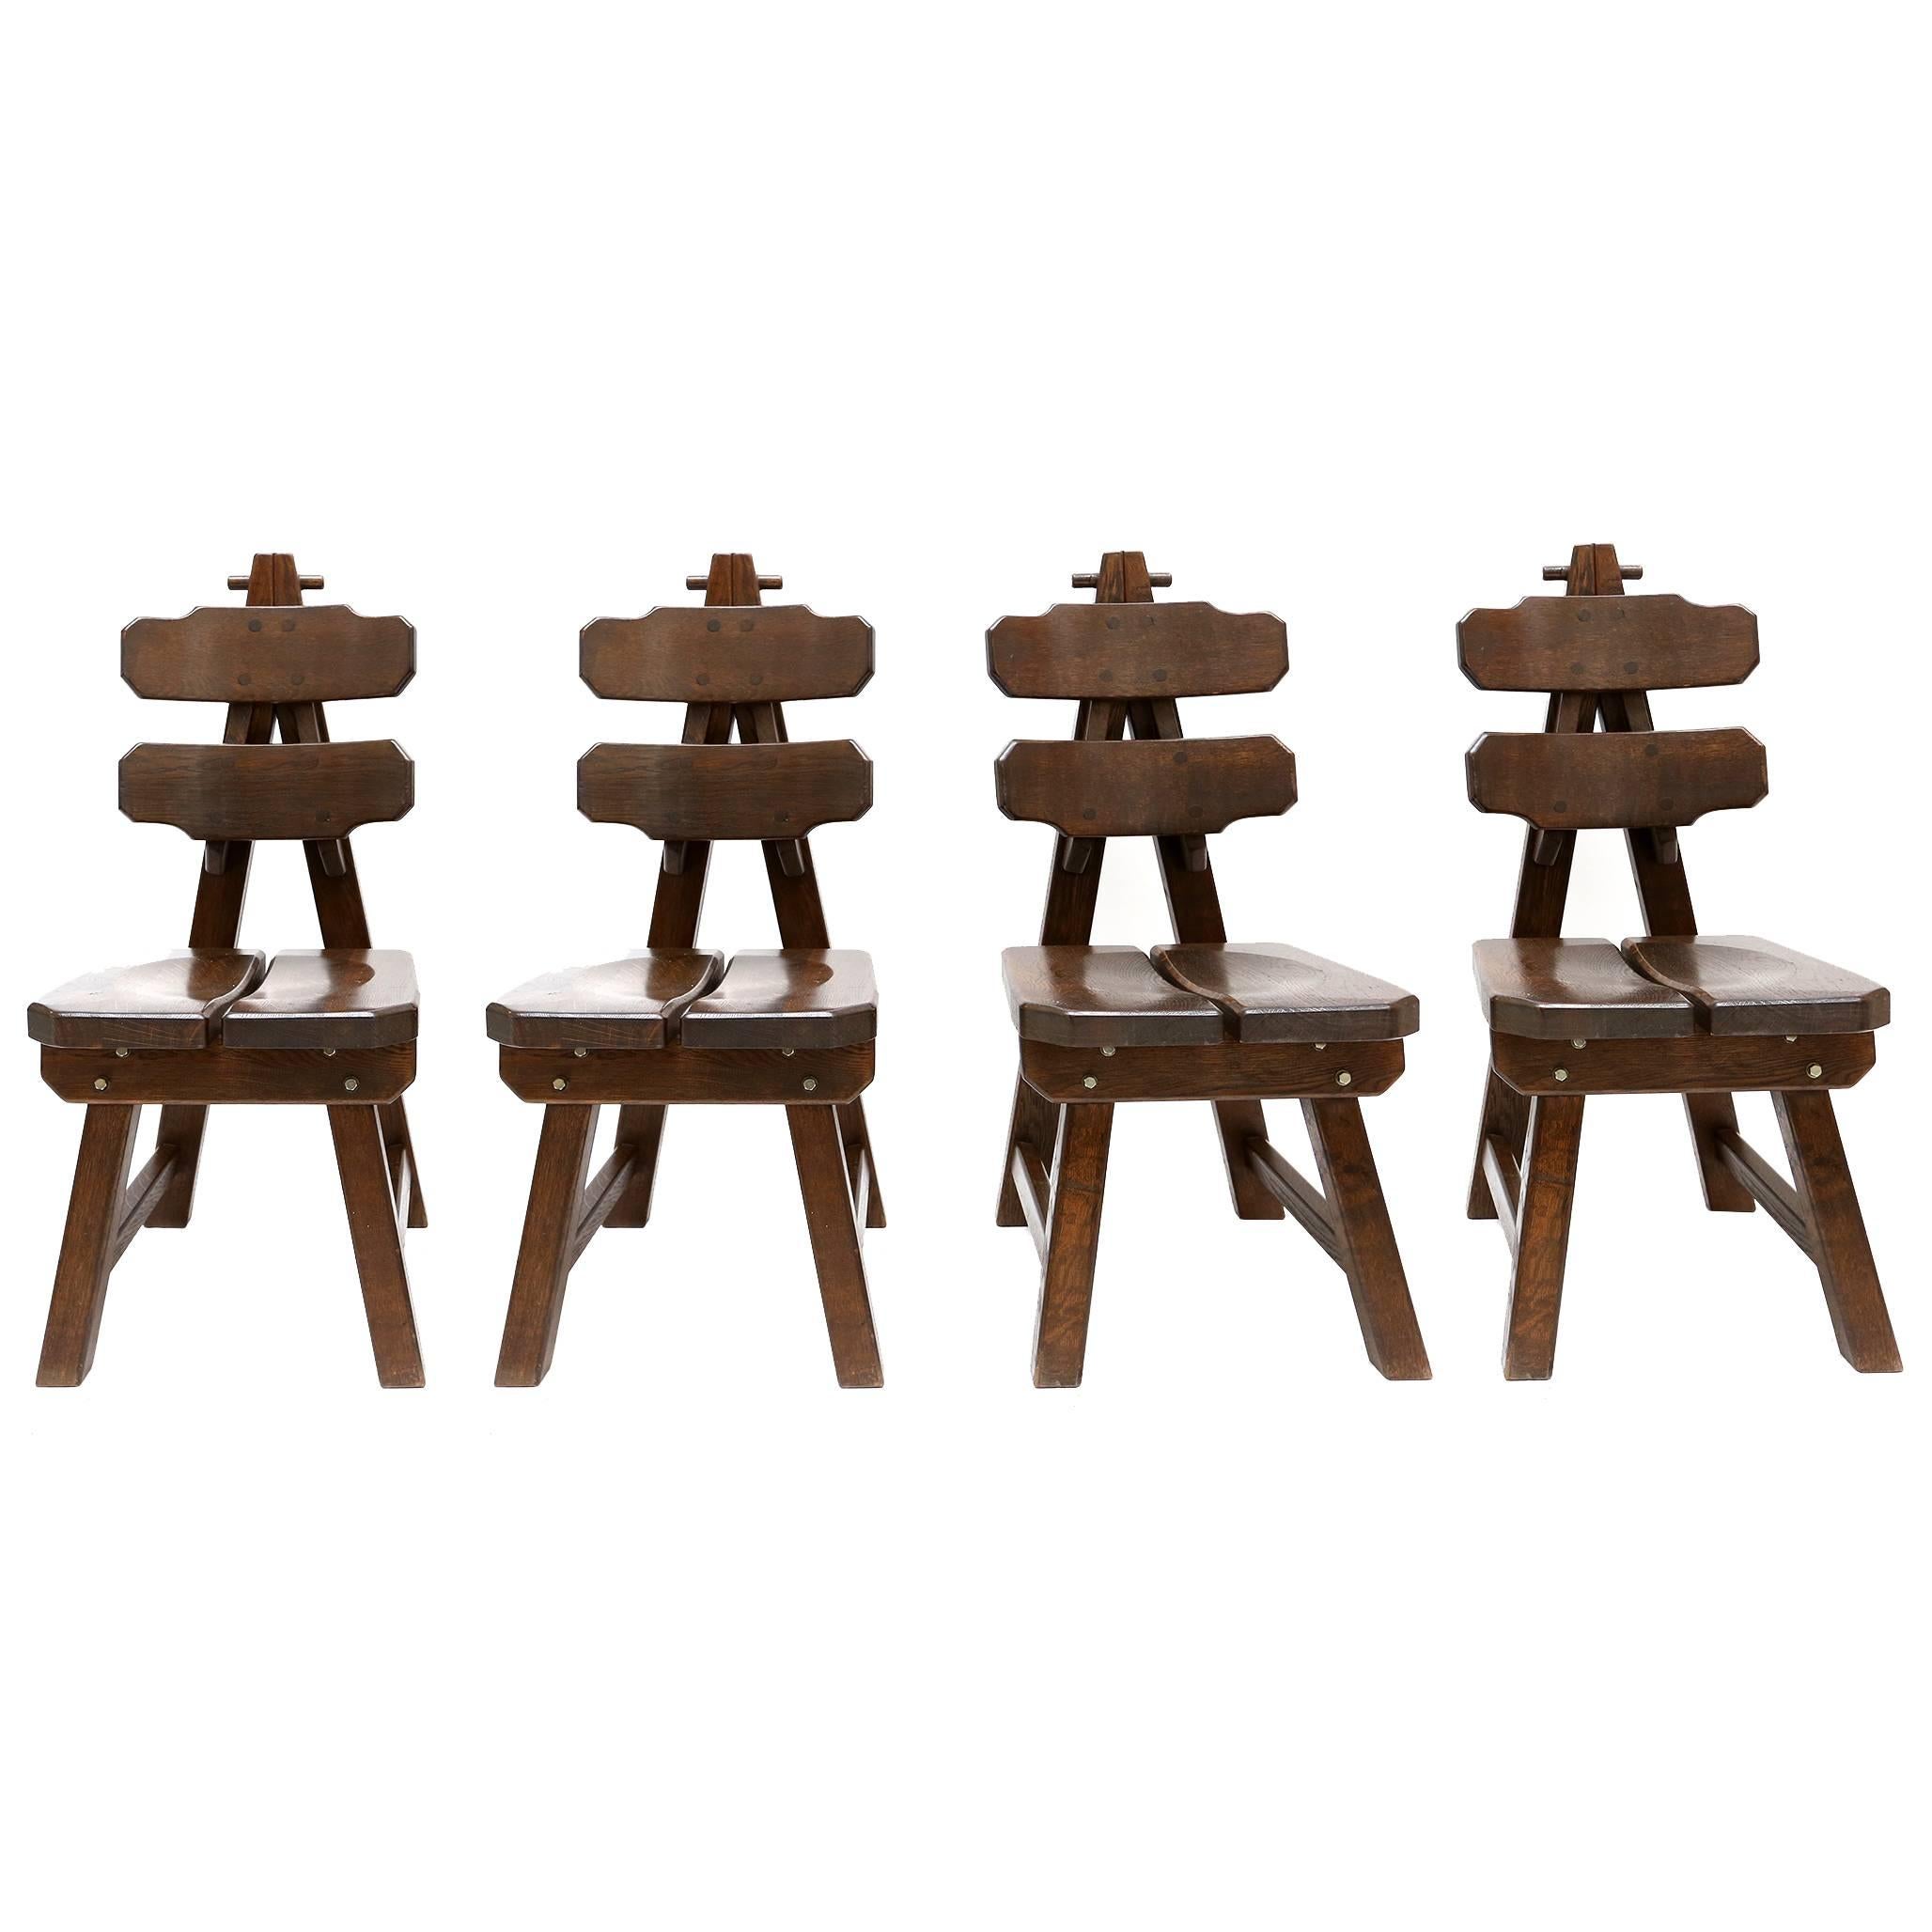 Impressive set of four stained oak chairs.
Very sculptural and geometrical,
Spain, circa 1960.


Measure: H 103 cm, W 44 cm, D 56 cm.